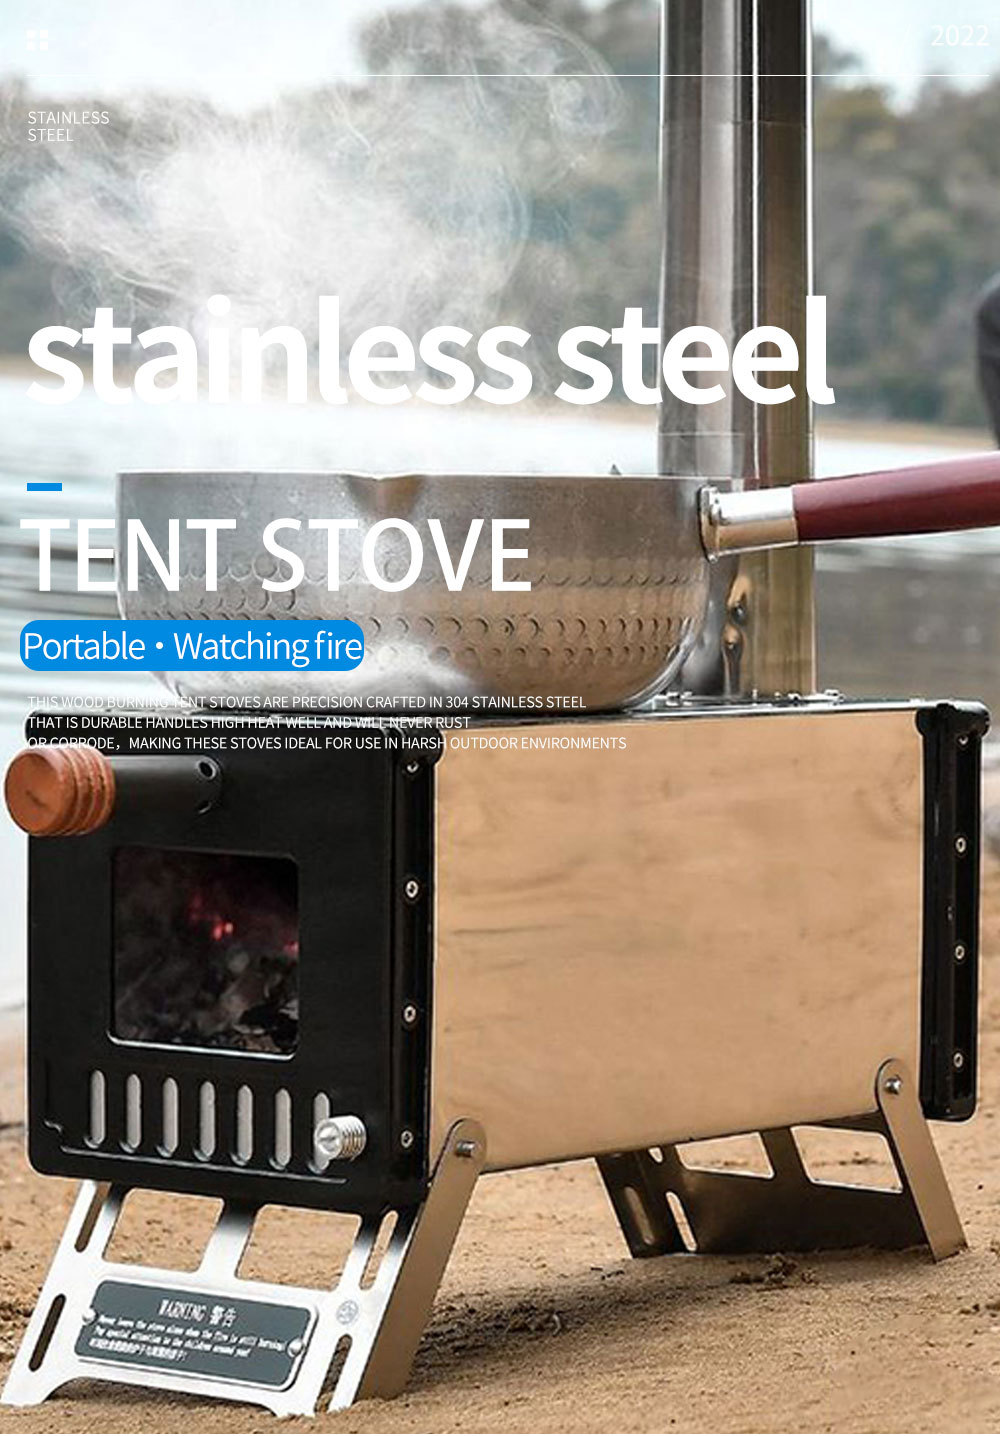 BC1117-05 stainless steel portable fiery and smokeless tent stove